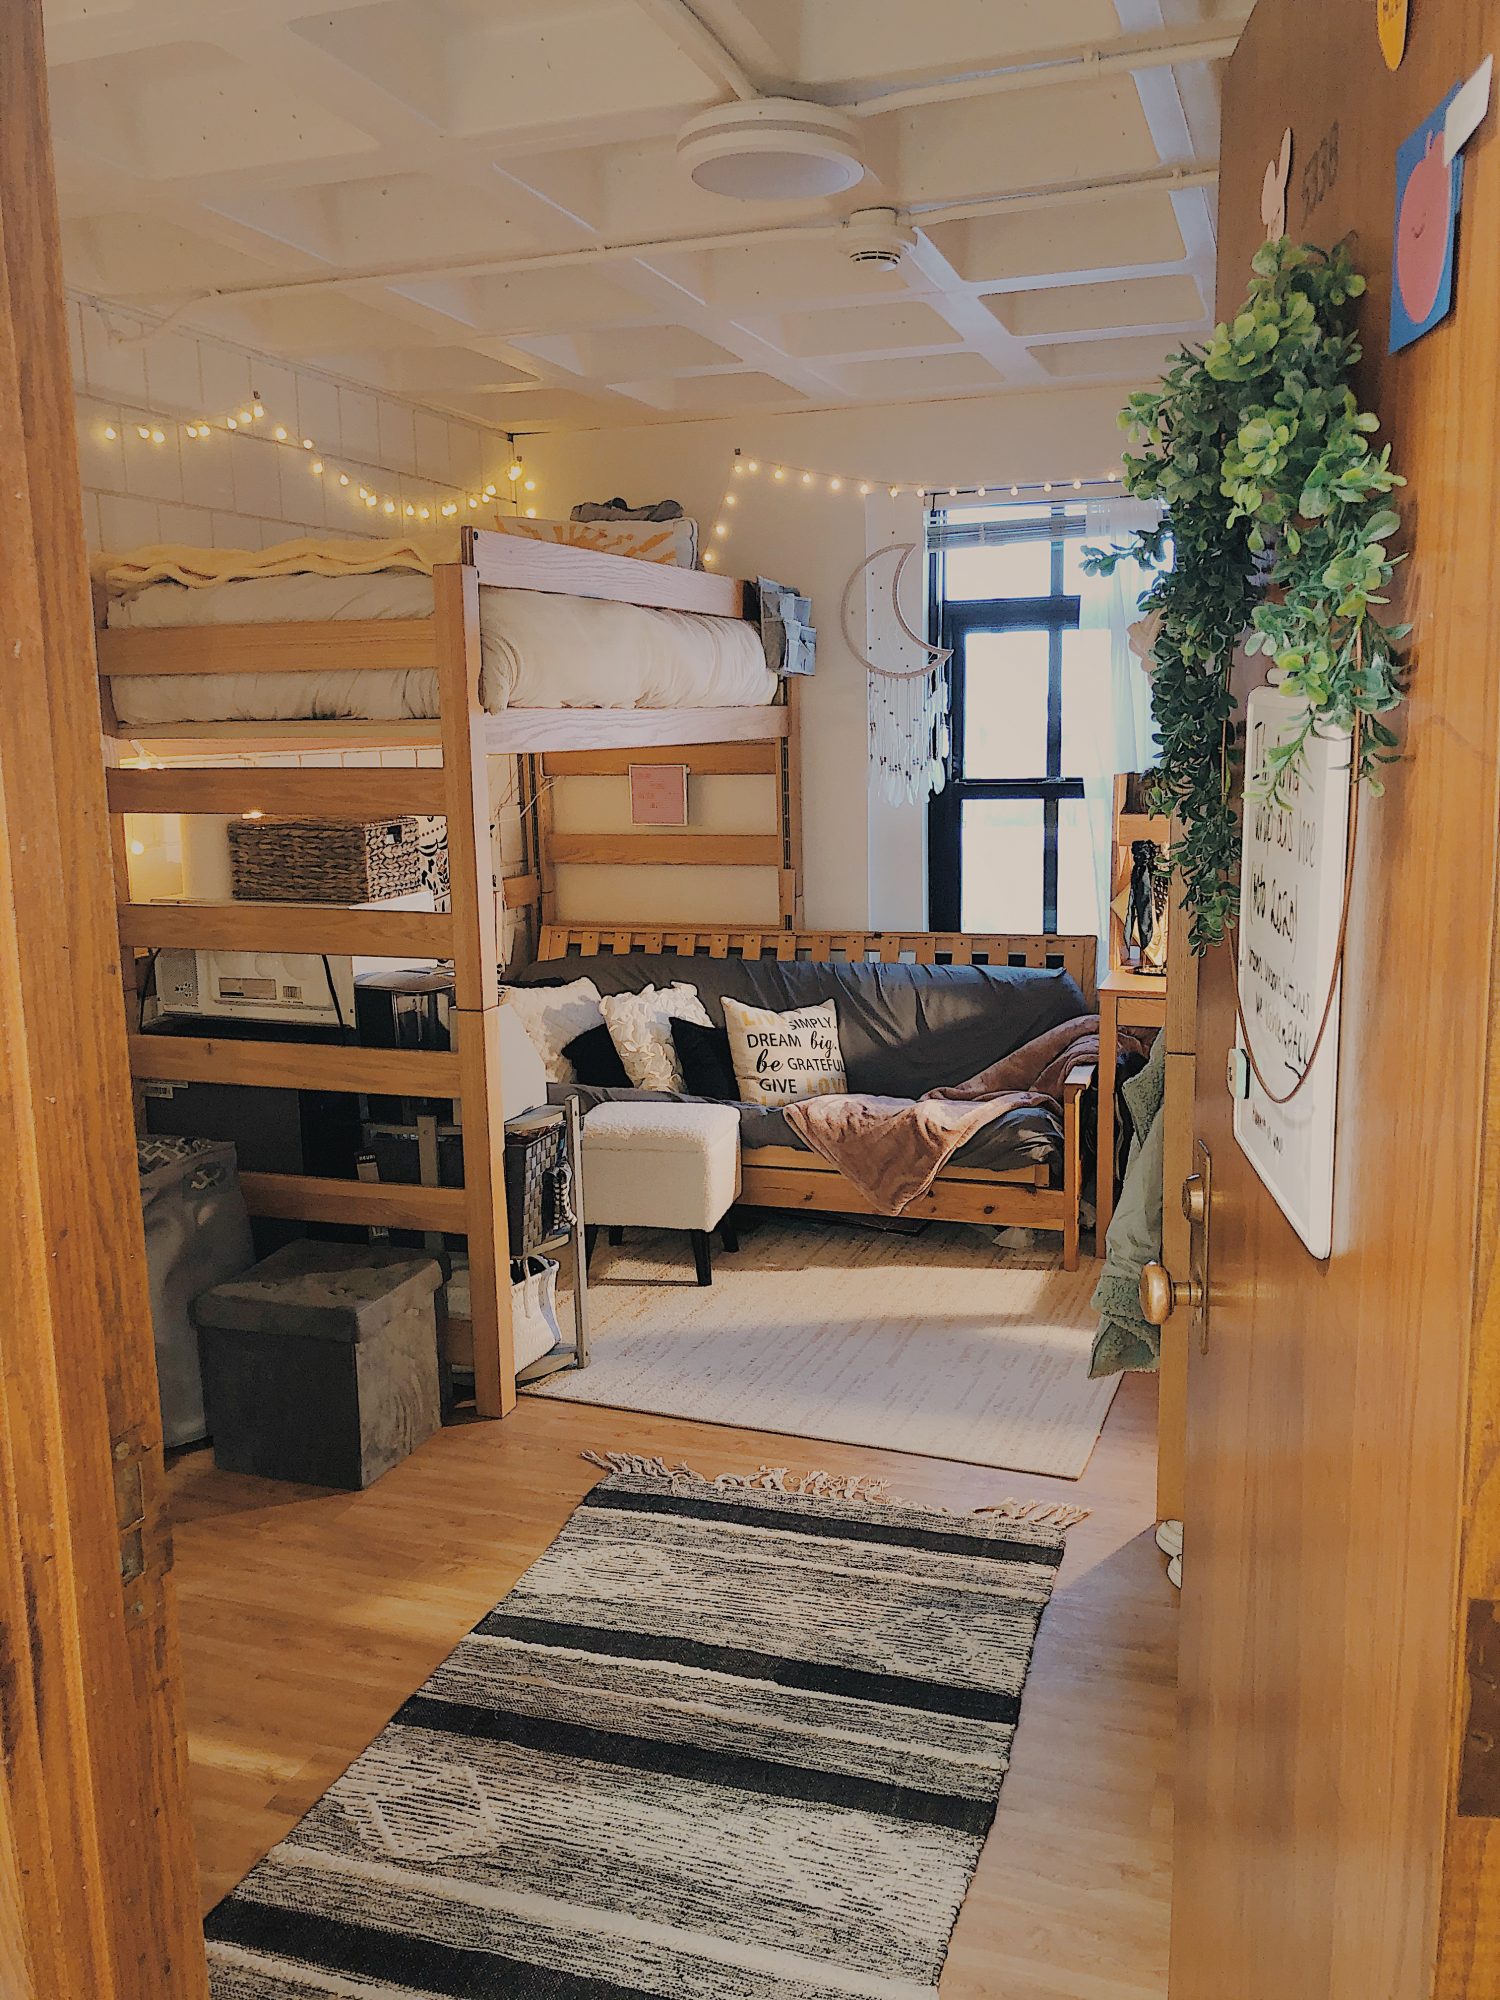 College Students Are Reinterpreting Dorm Rooms In Light Of COVID ...